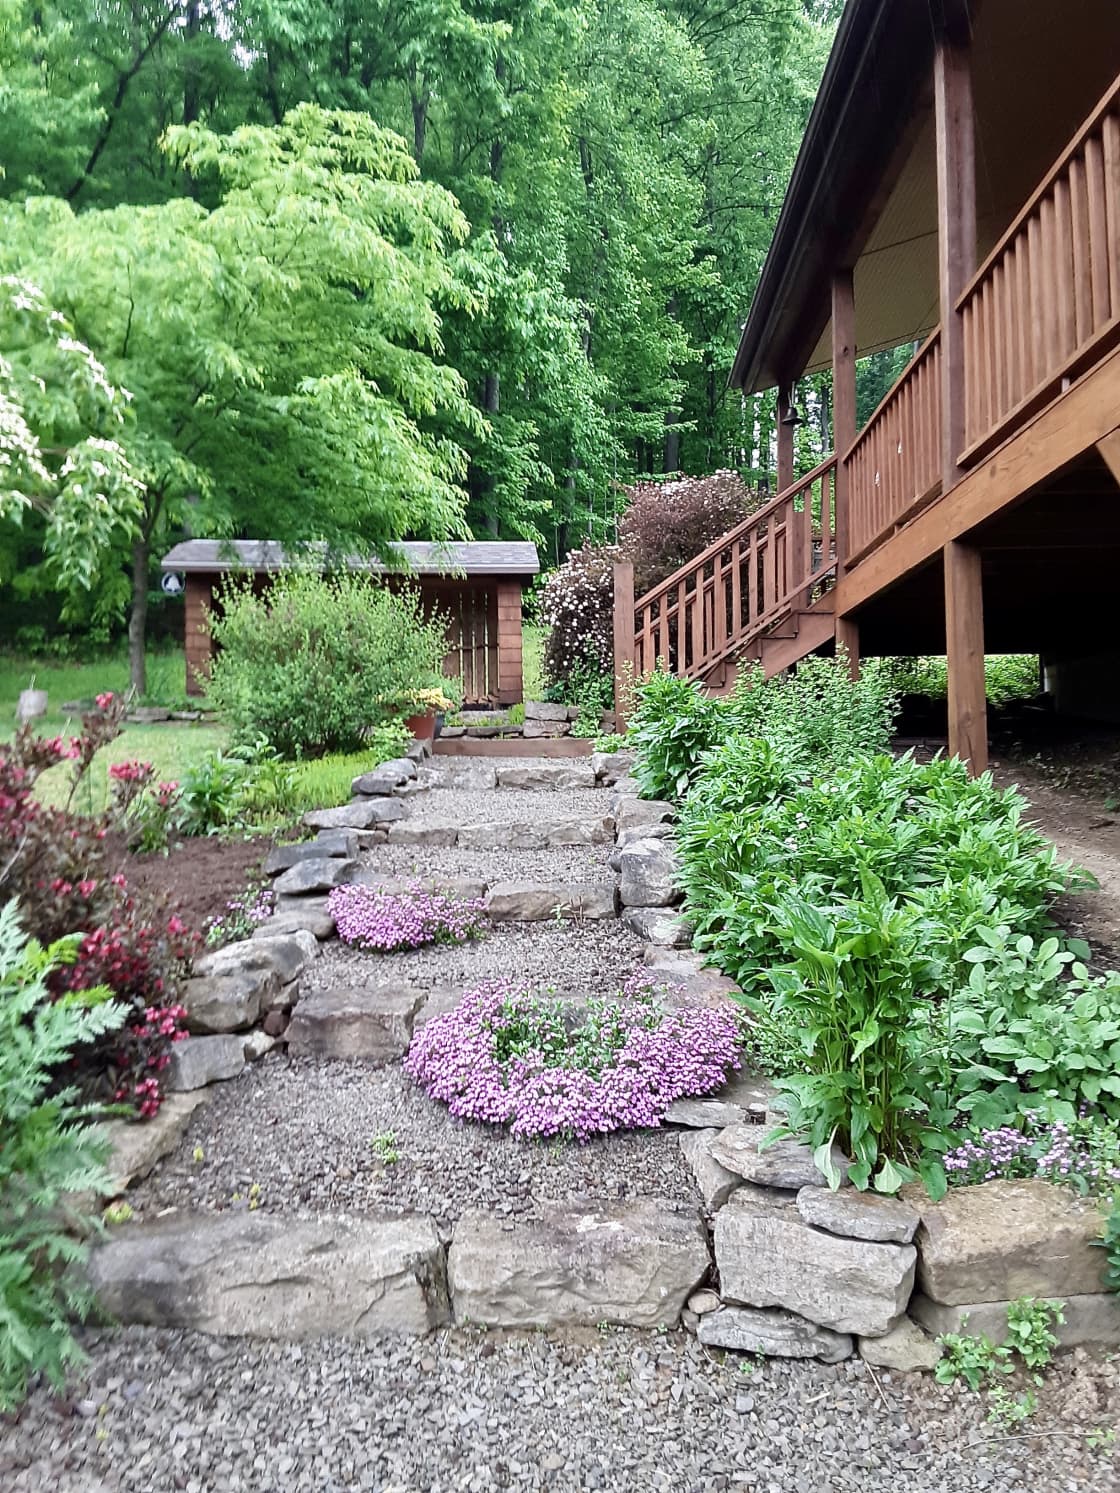 Steps lined with herbs and flowers lead from the driveway to the apartment.